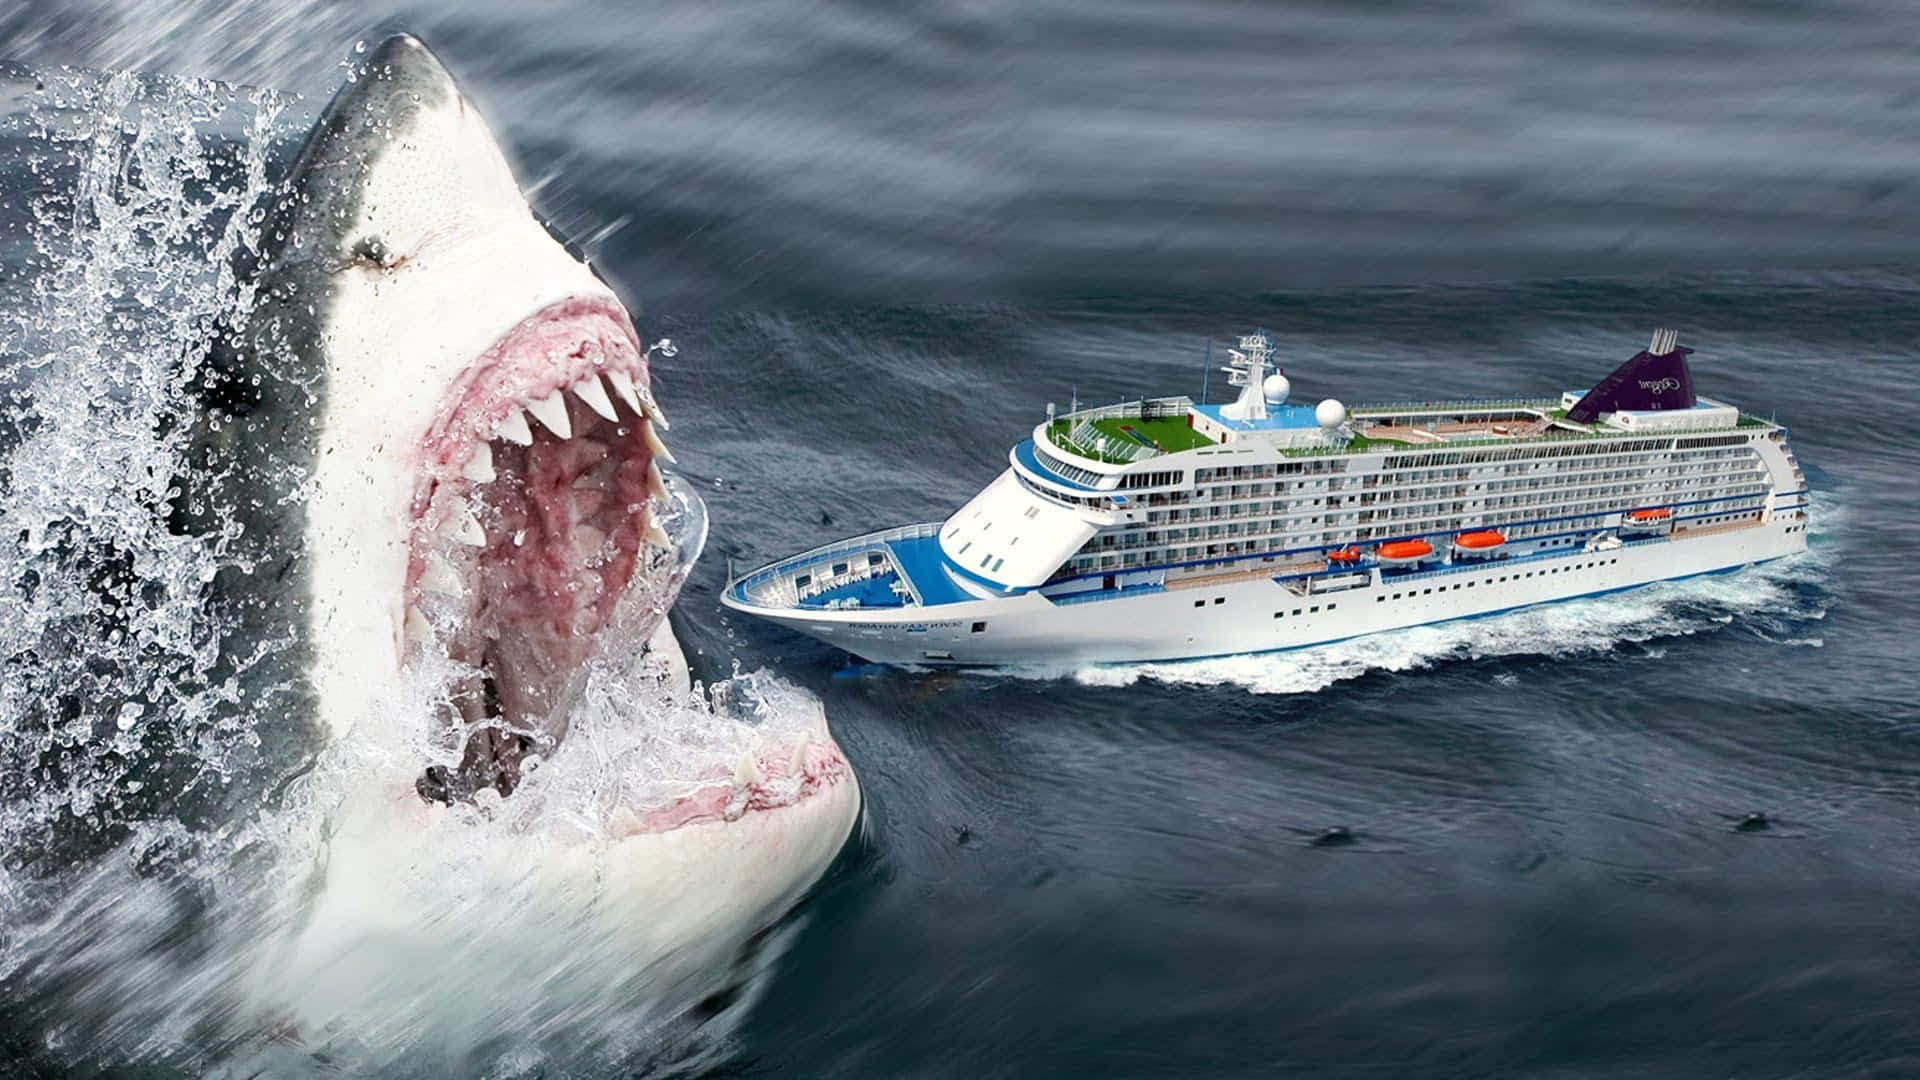 Giant Megalodon Attacking Cruise Ship Picture